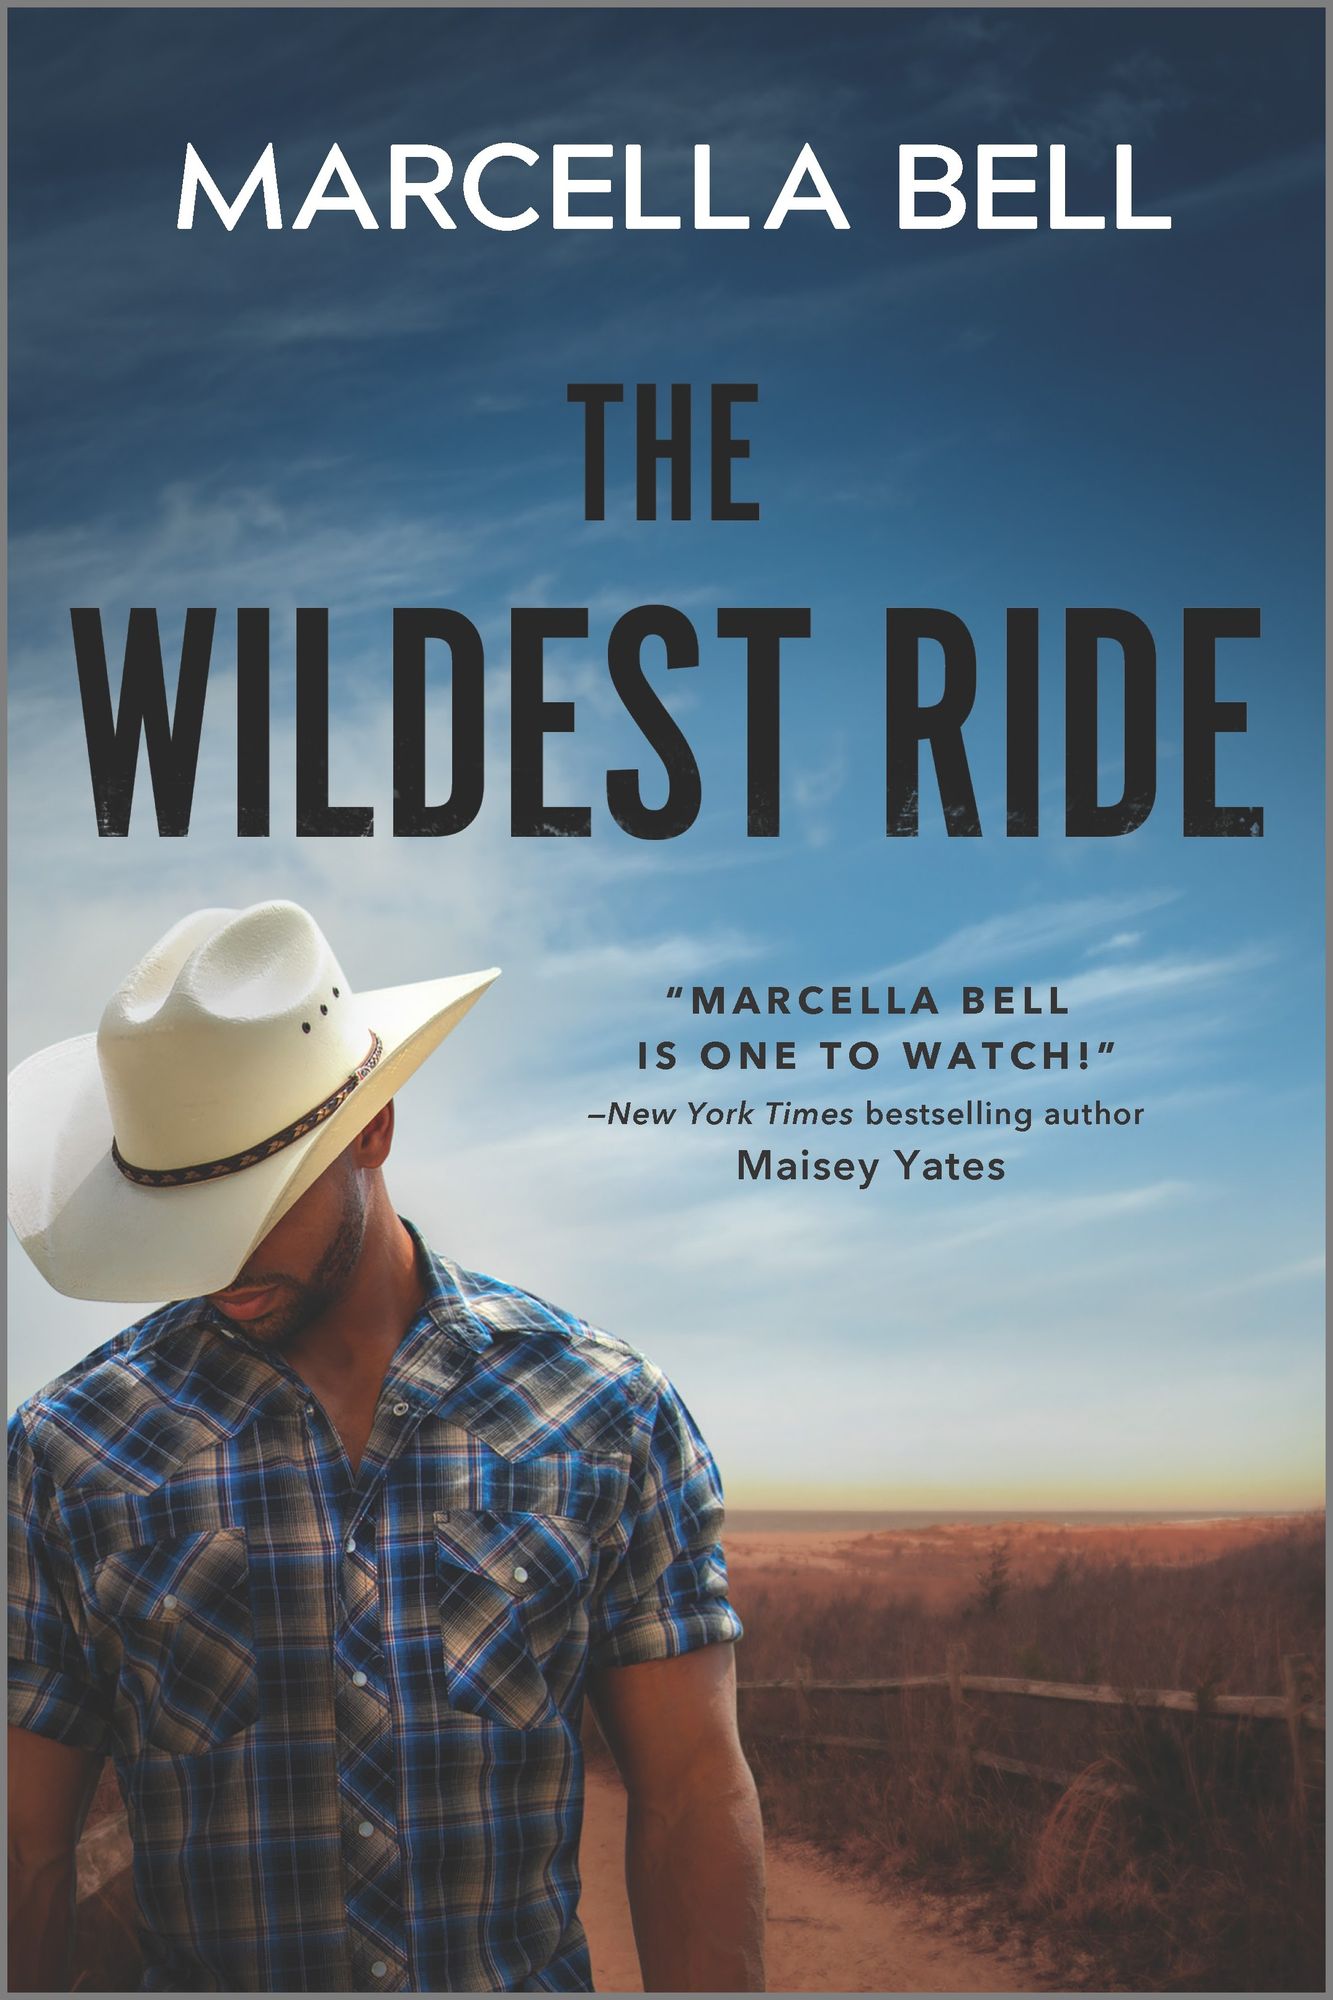 The Wildest Ride by Marcella Bell